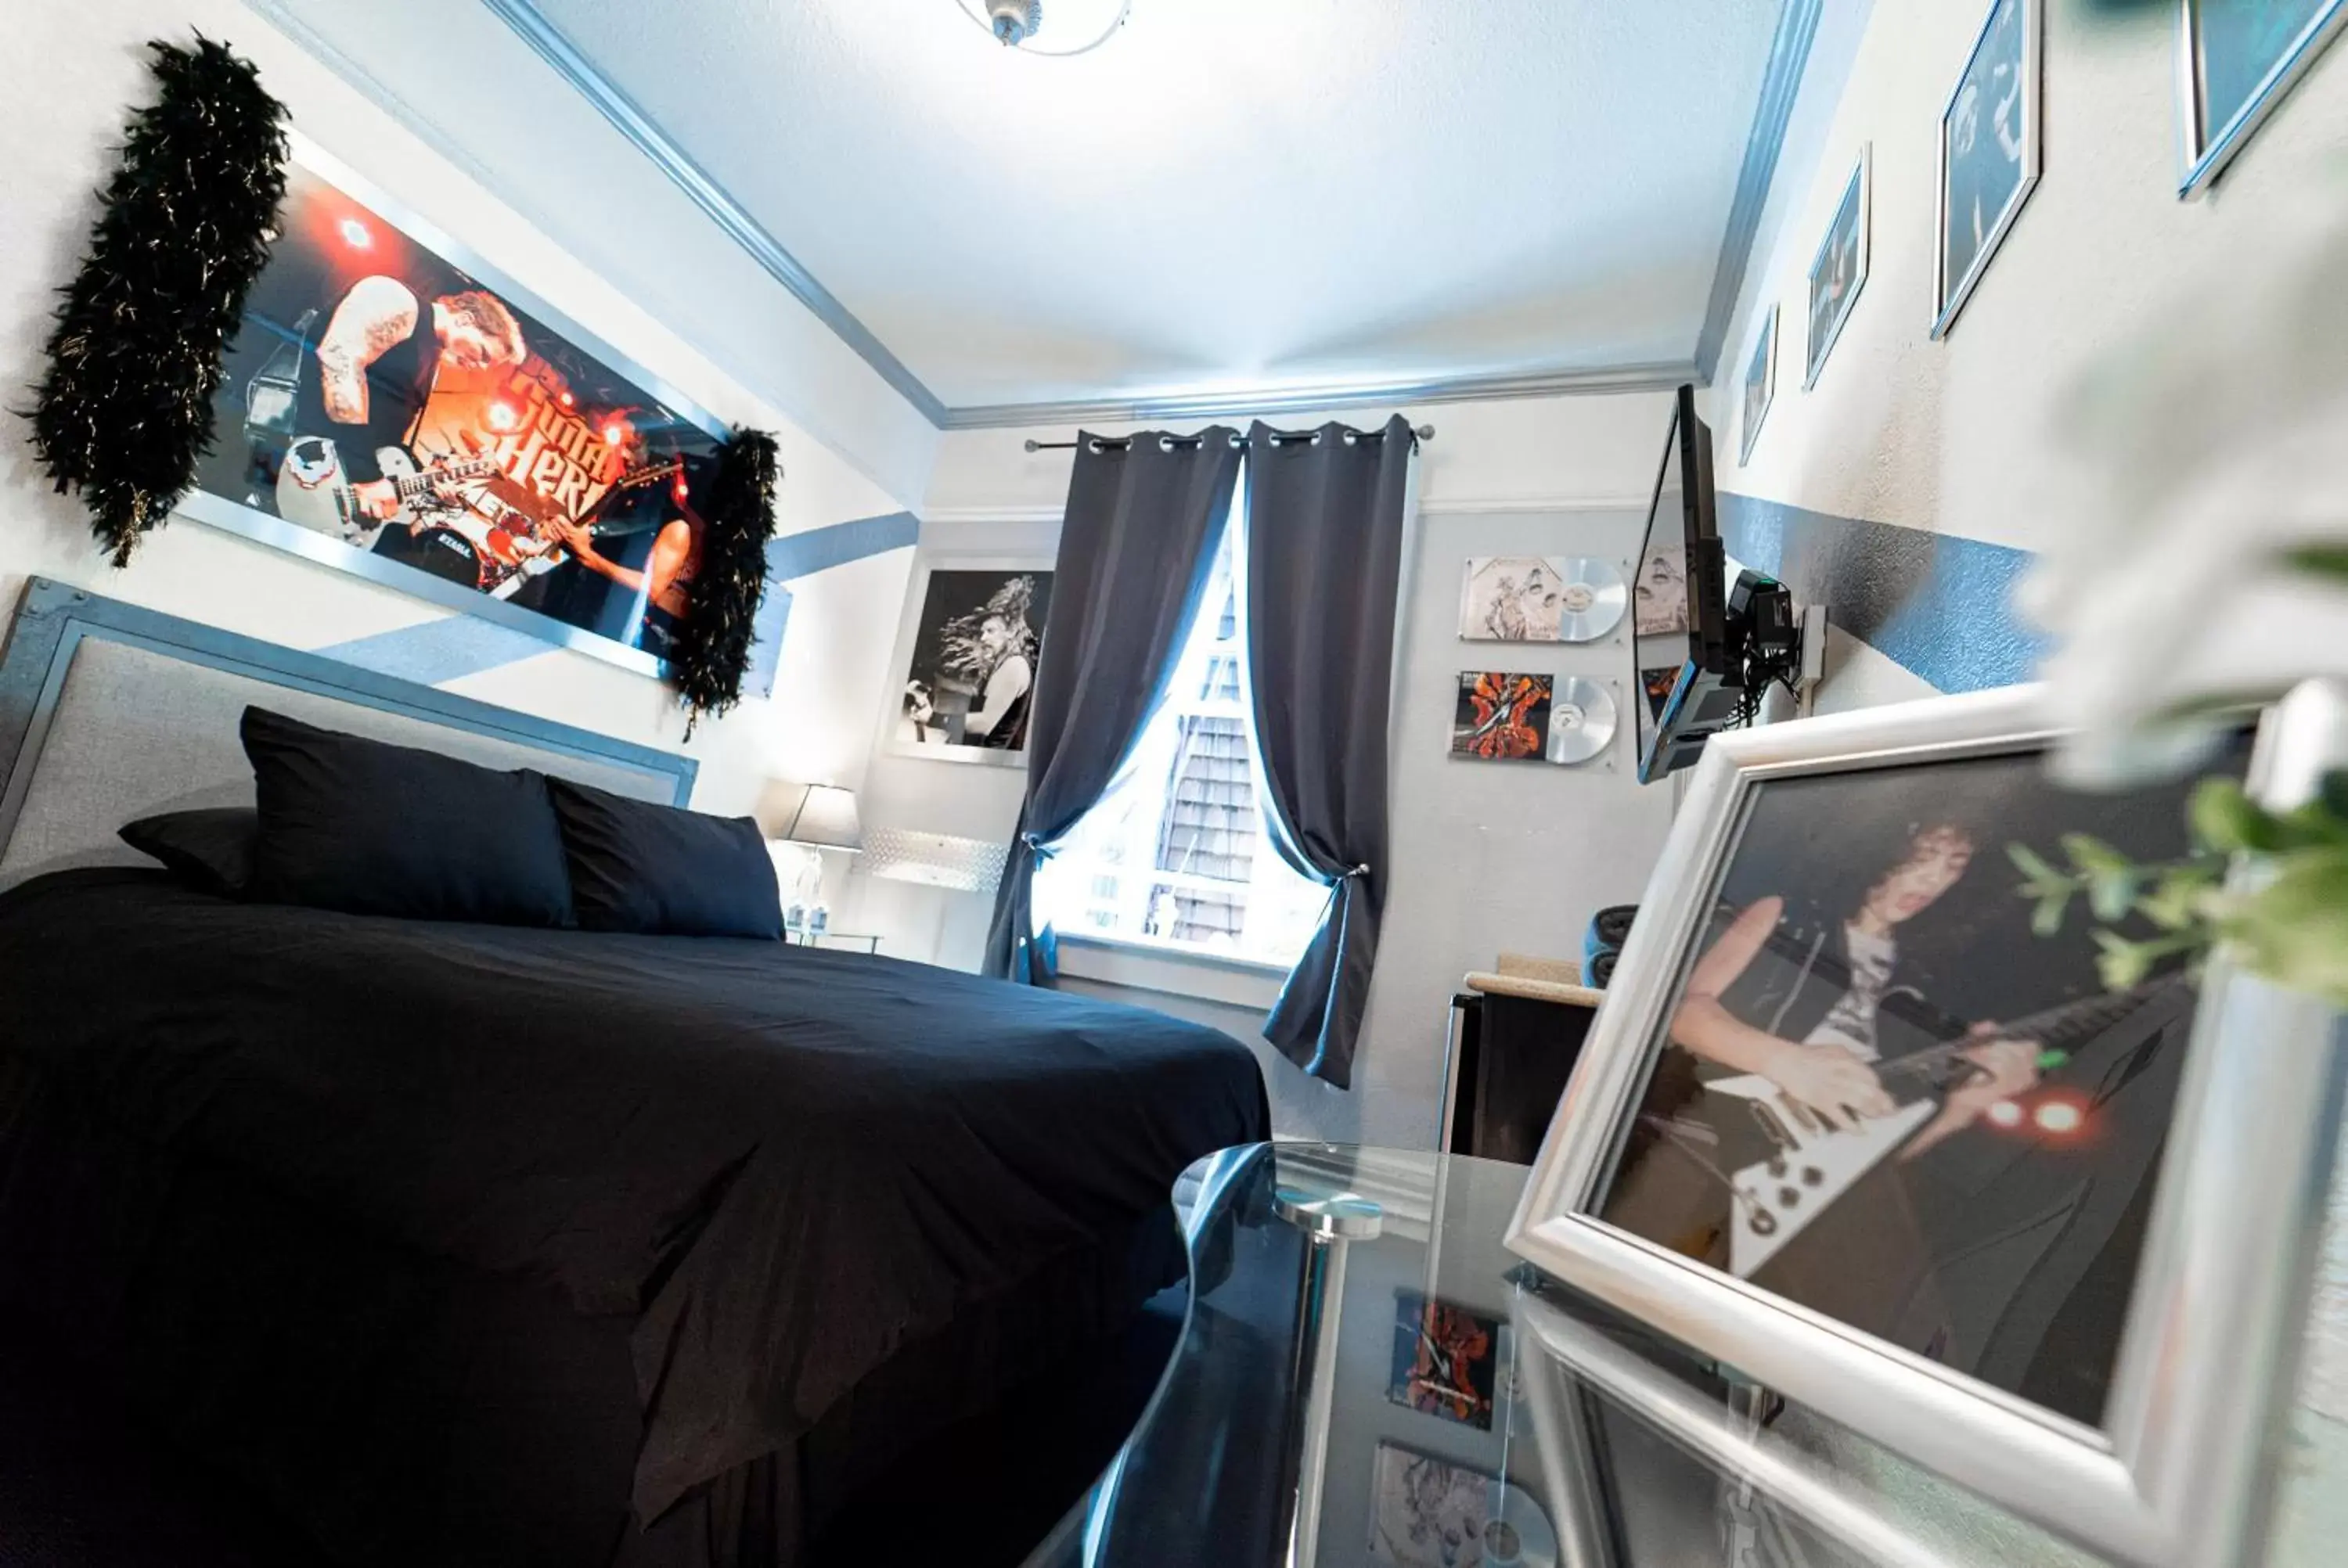 Bedroom in Music City Hotel - Home of the San Francisco Music Hall of Fame